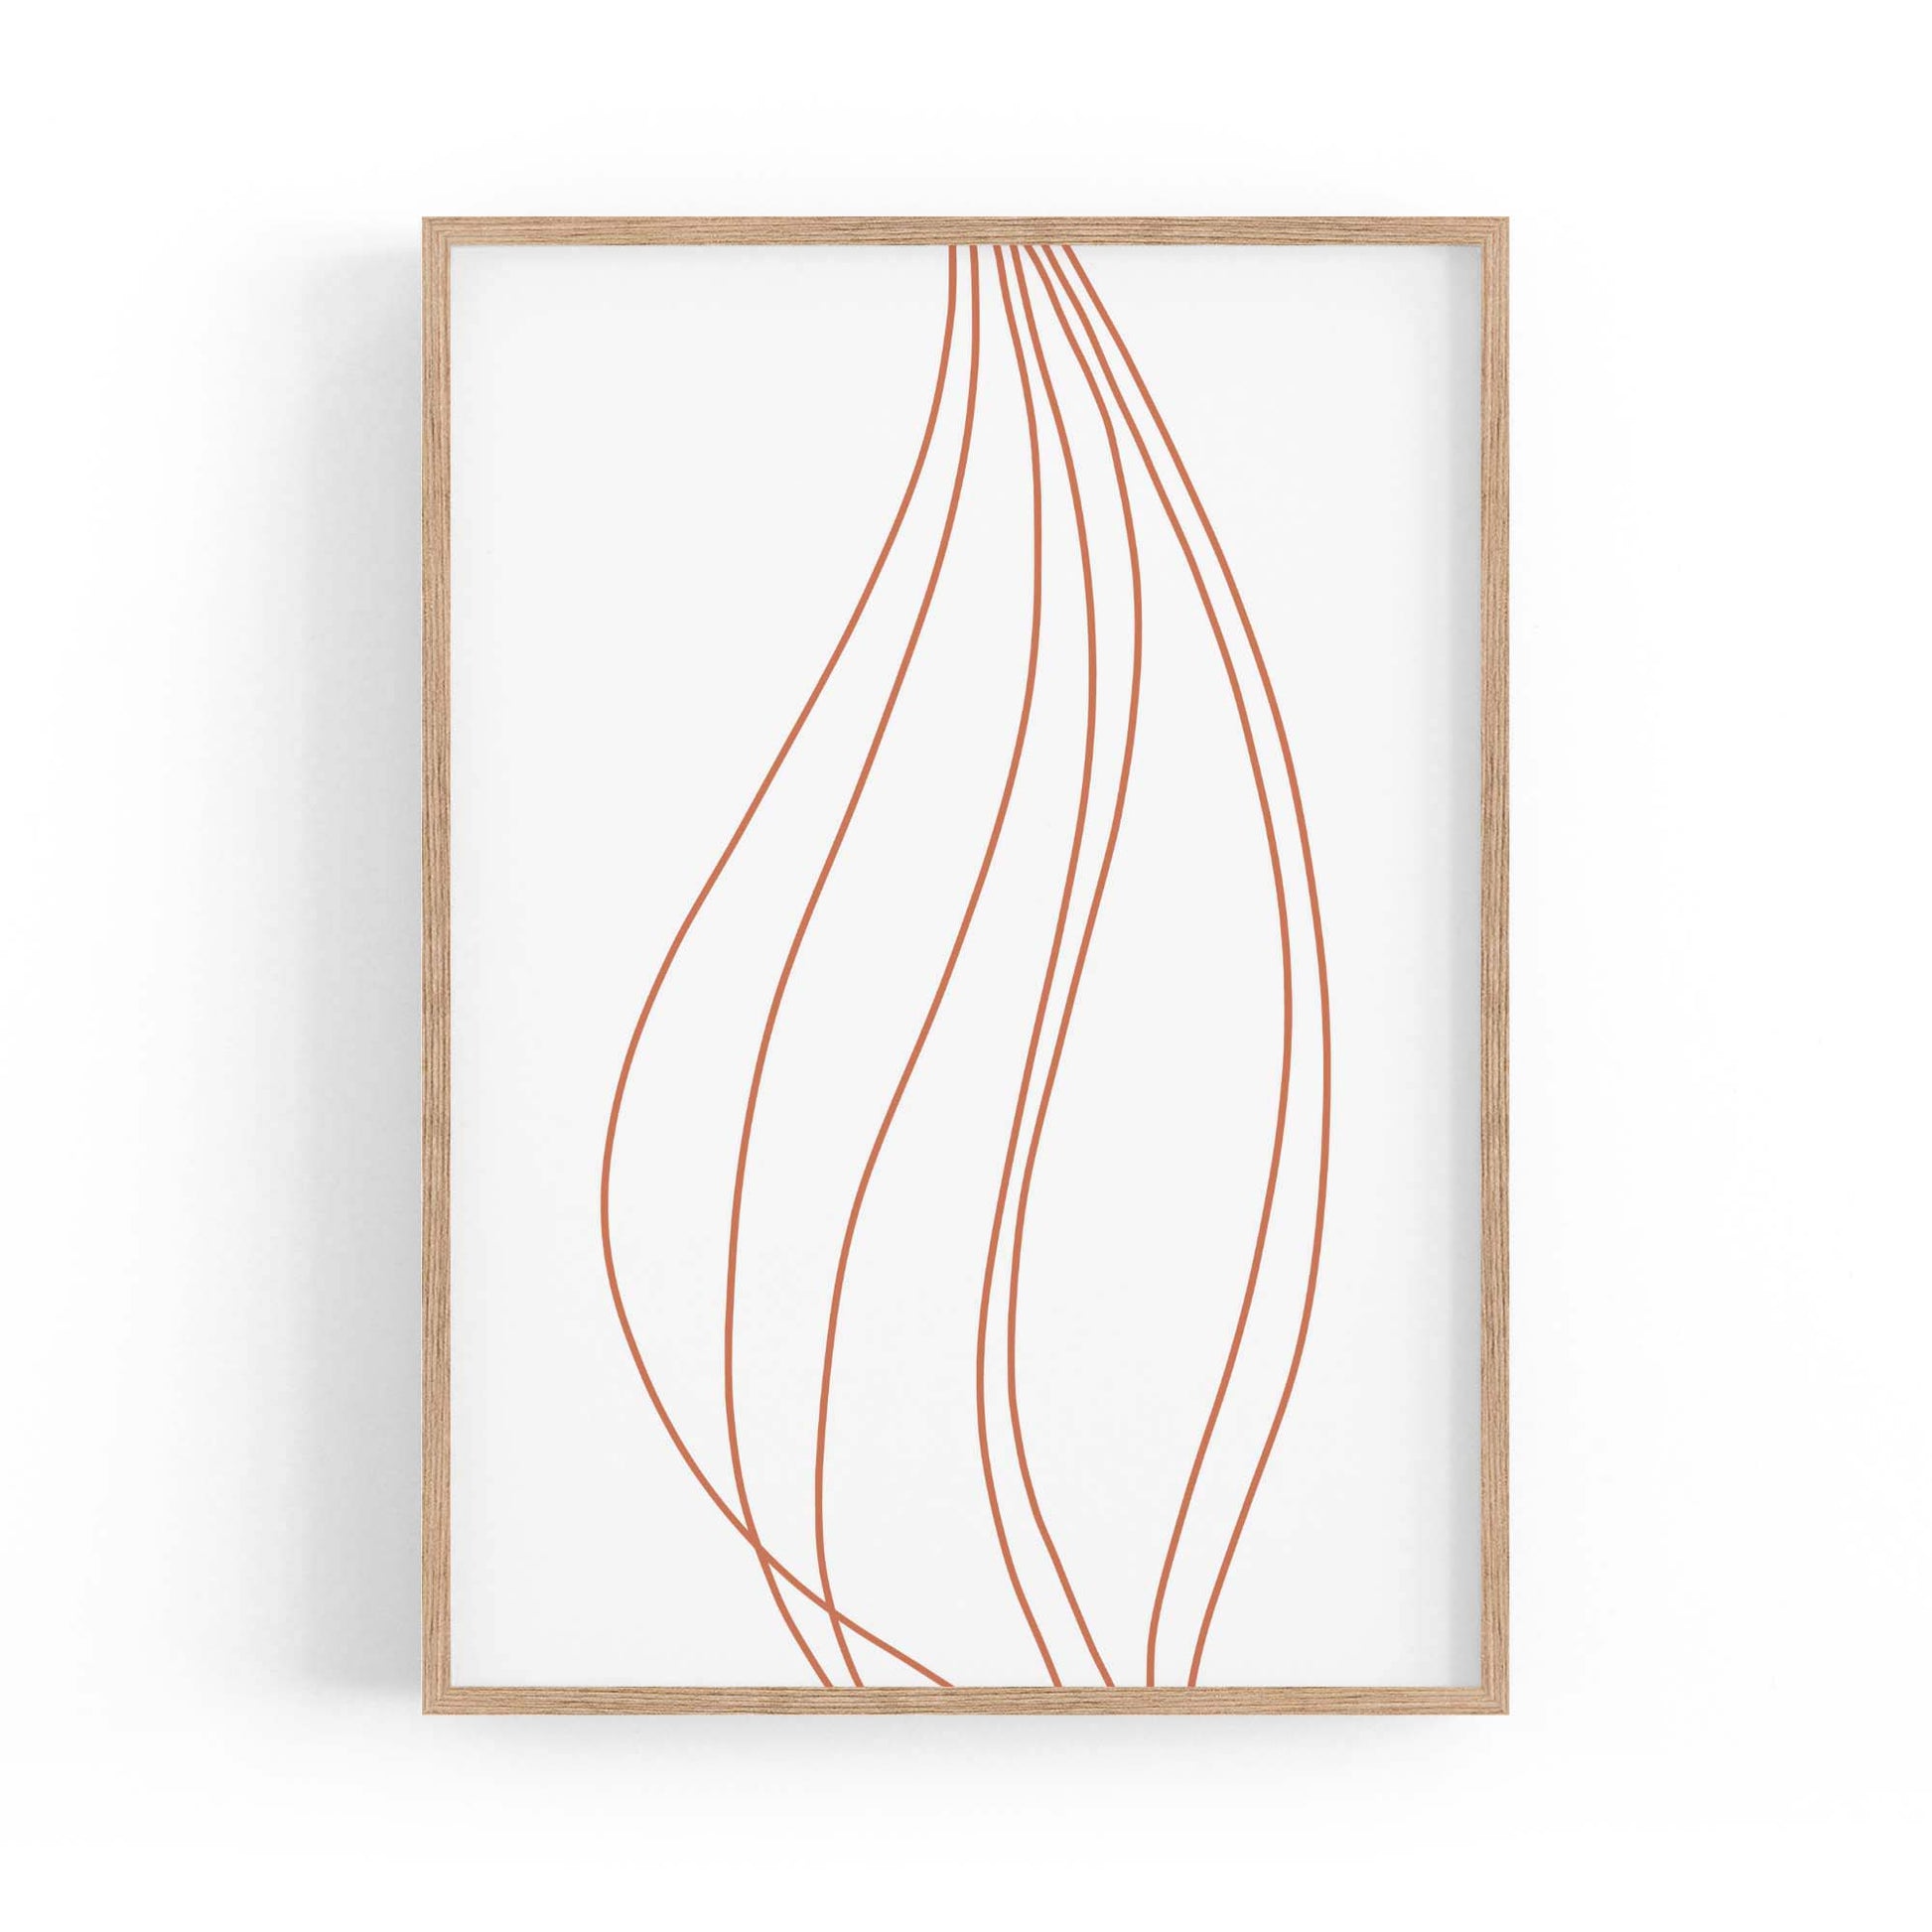 Abstract Line Artwork Minimal Modern Wall Art #1 - The Affordable Art Company